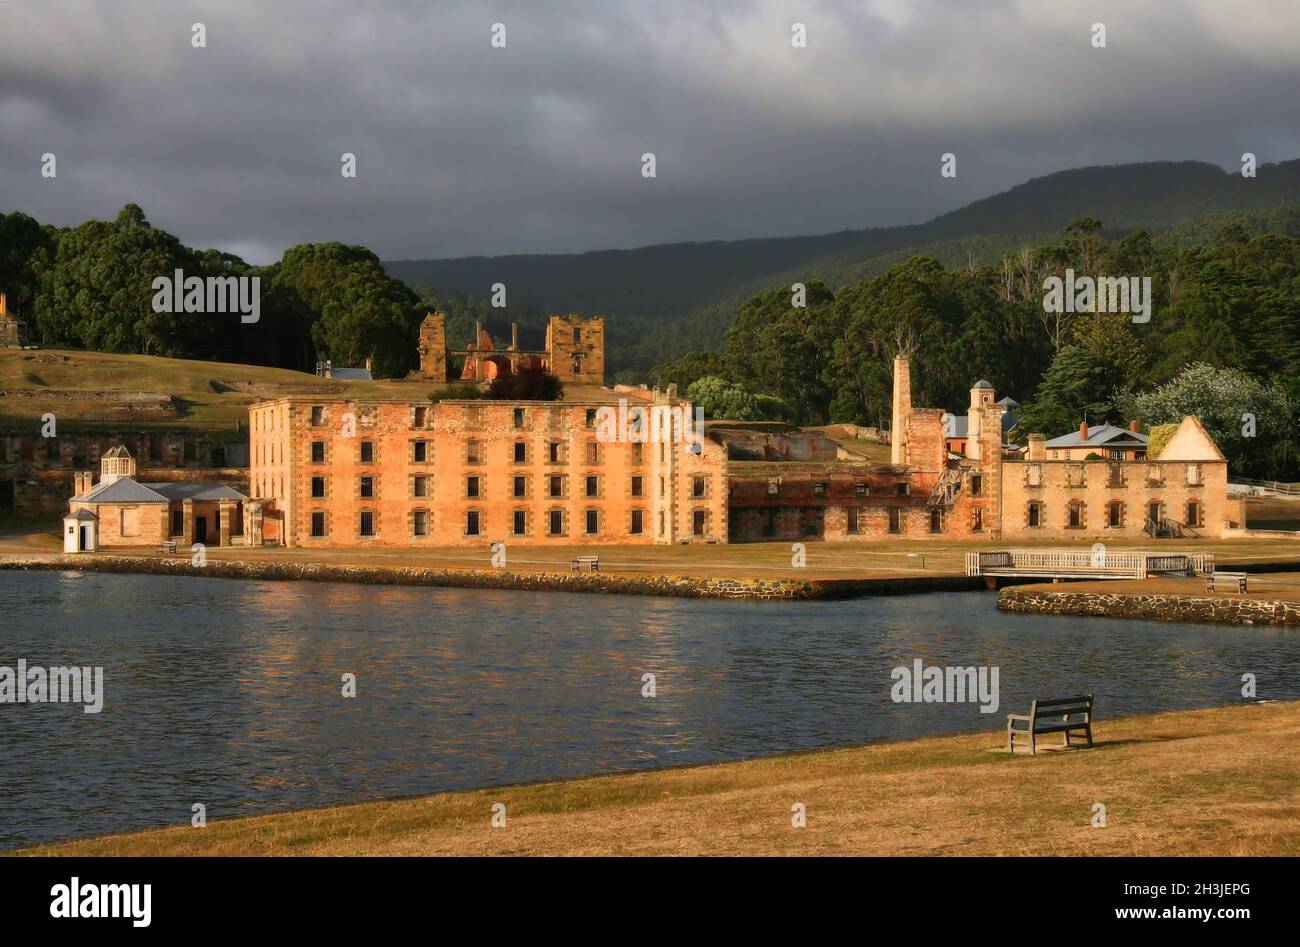 Convict penitentiary soon after sunrise with dark clouds at Port Arthur penal colony, Tasmania, Australia Stock Photo